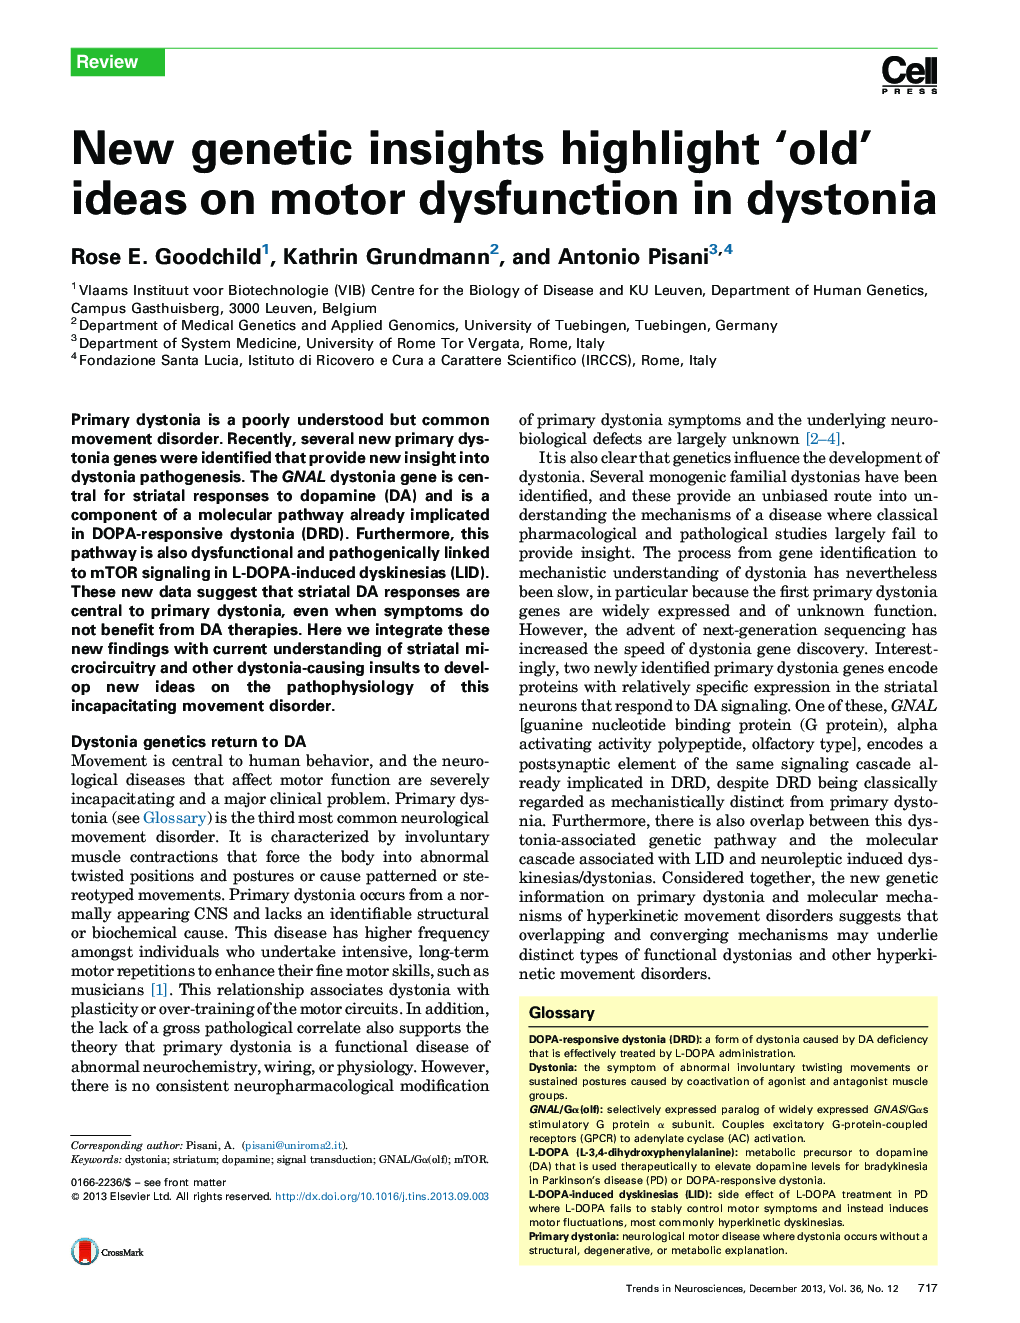 New genetic insights highlight 'old' ideas on motor dysfunction in dystonia